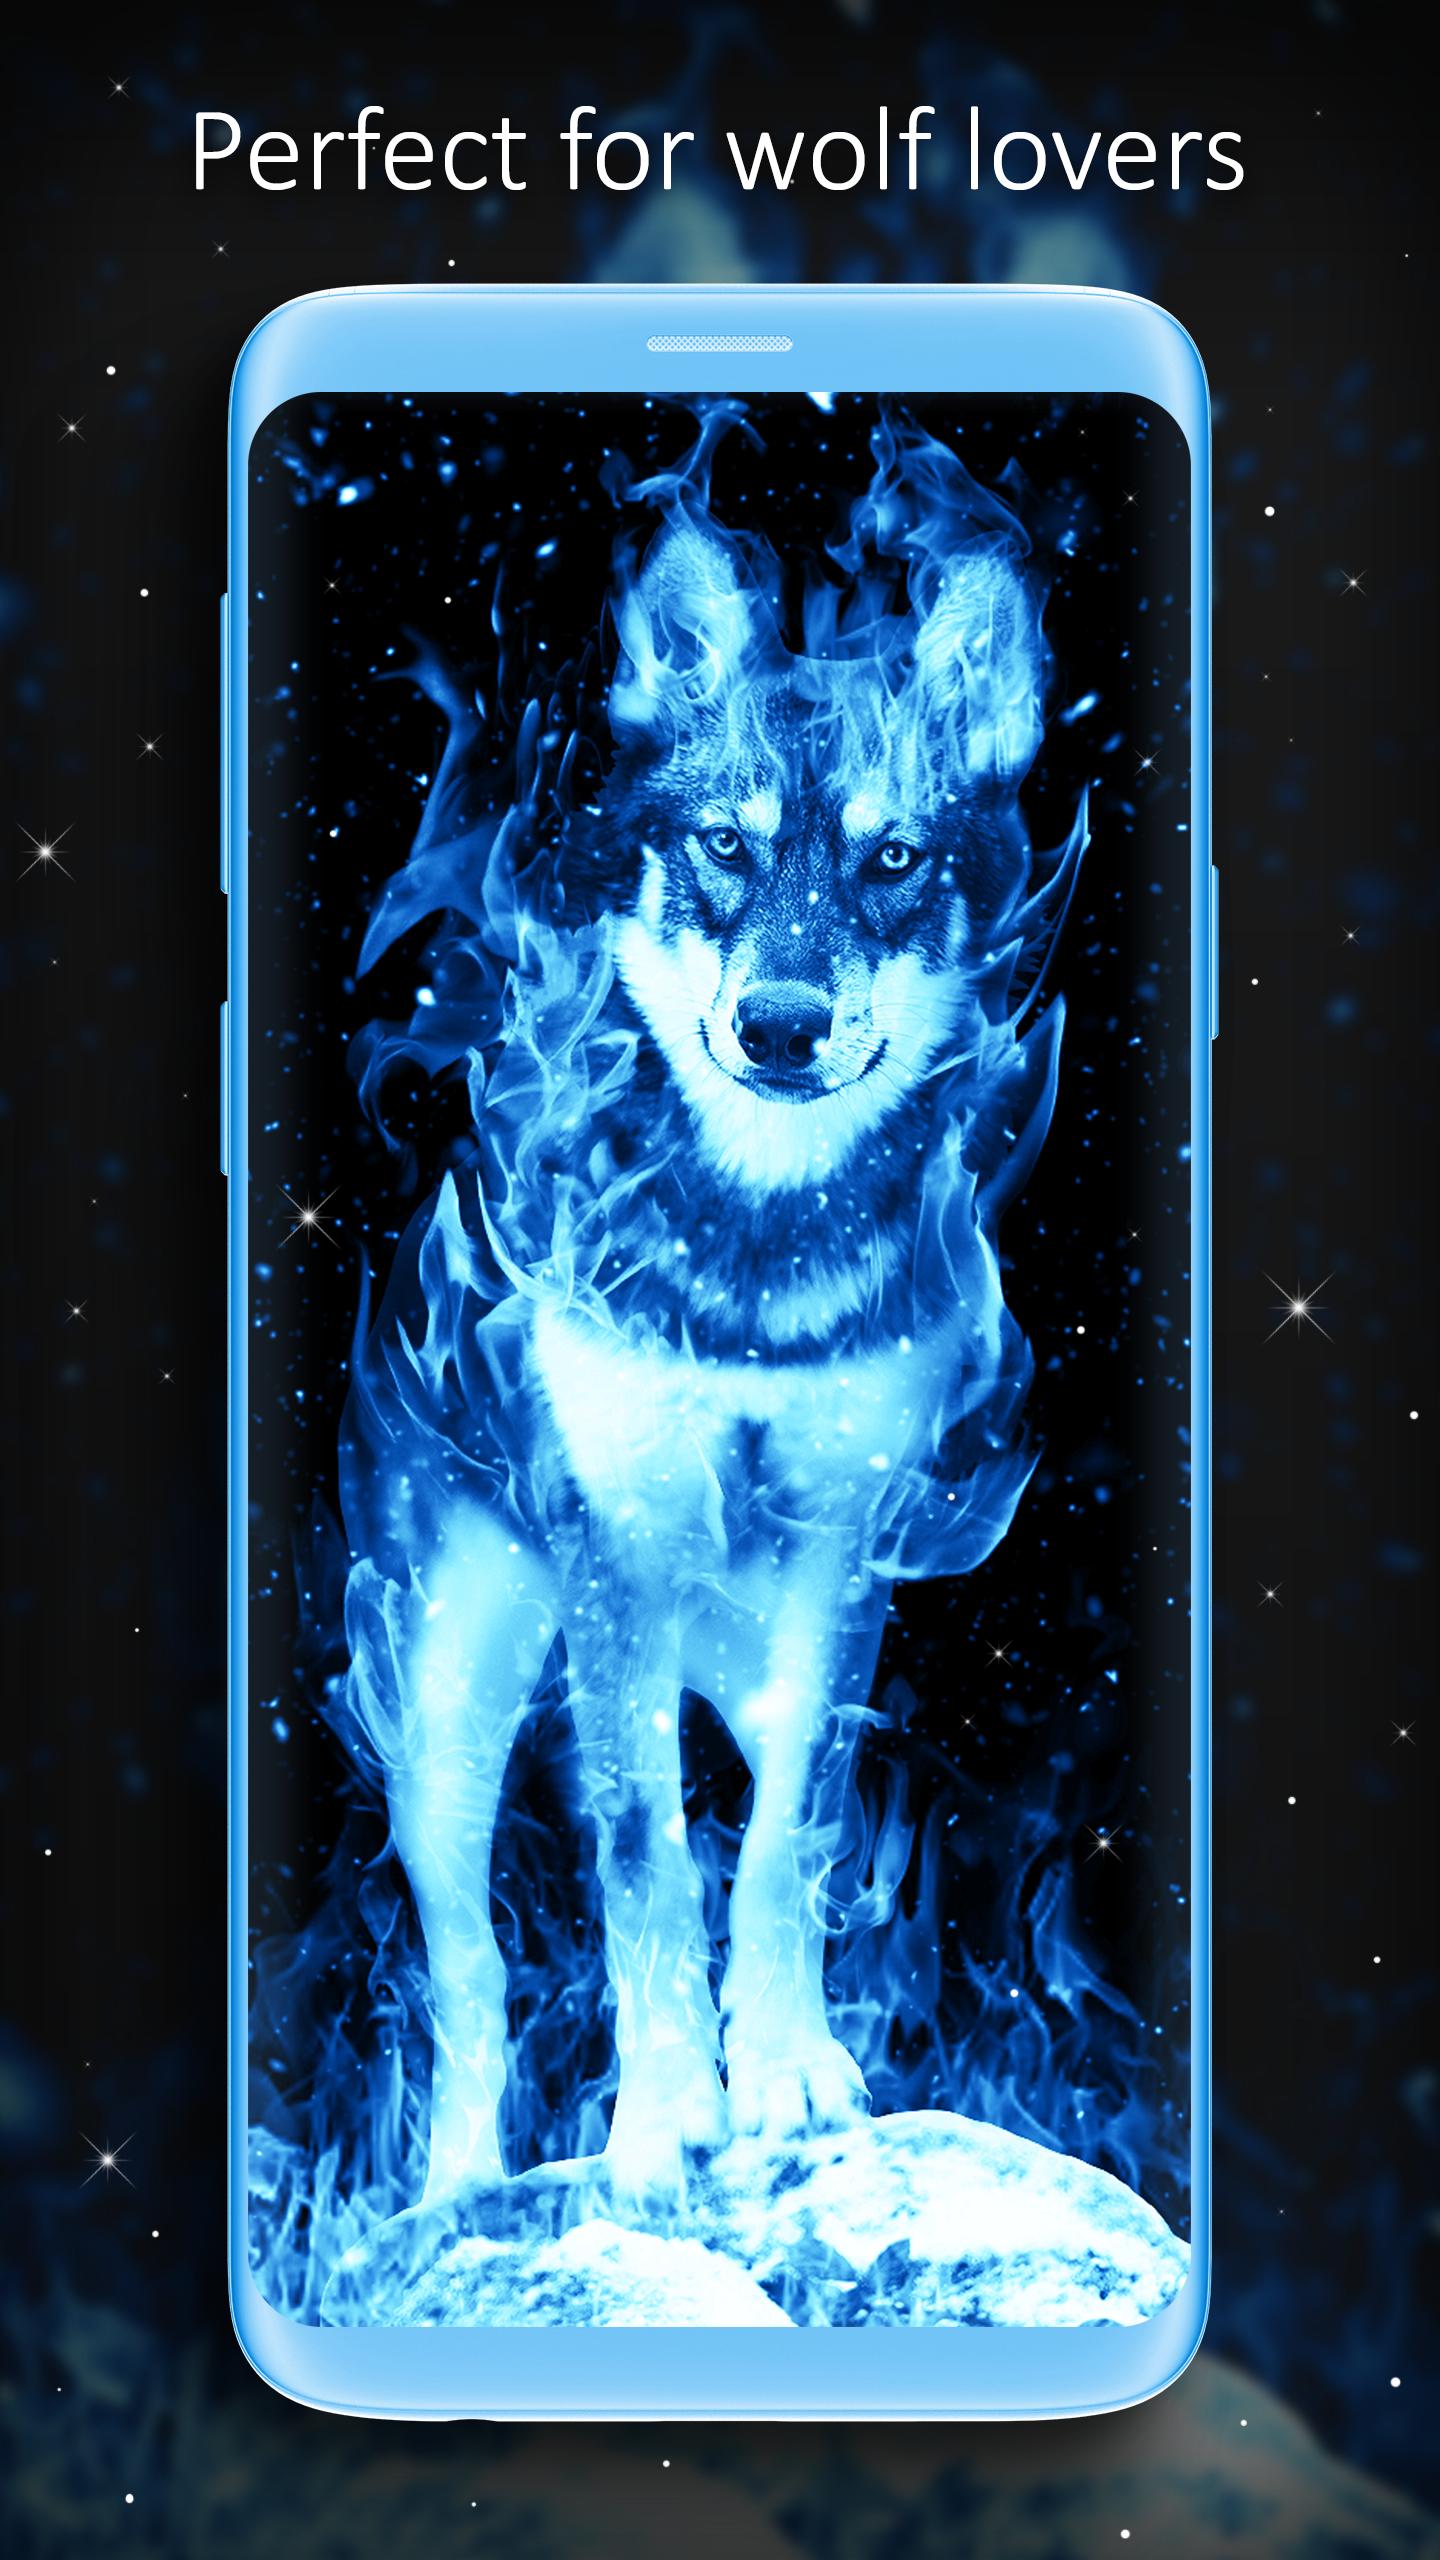 Ice Fire Wolf Wallpaper For Android Apk Download